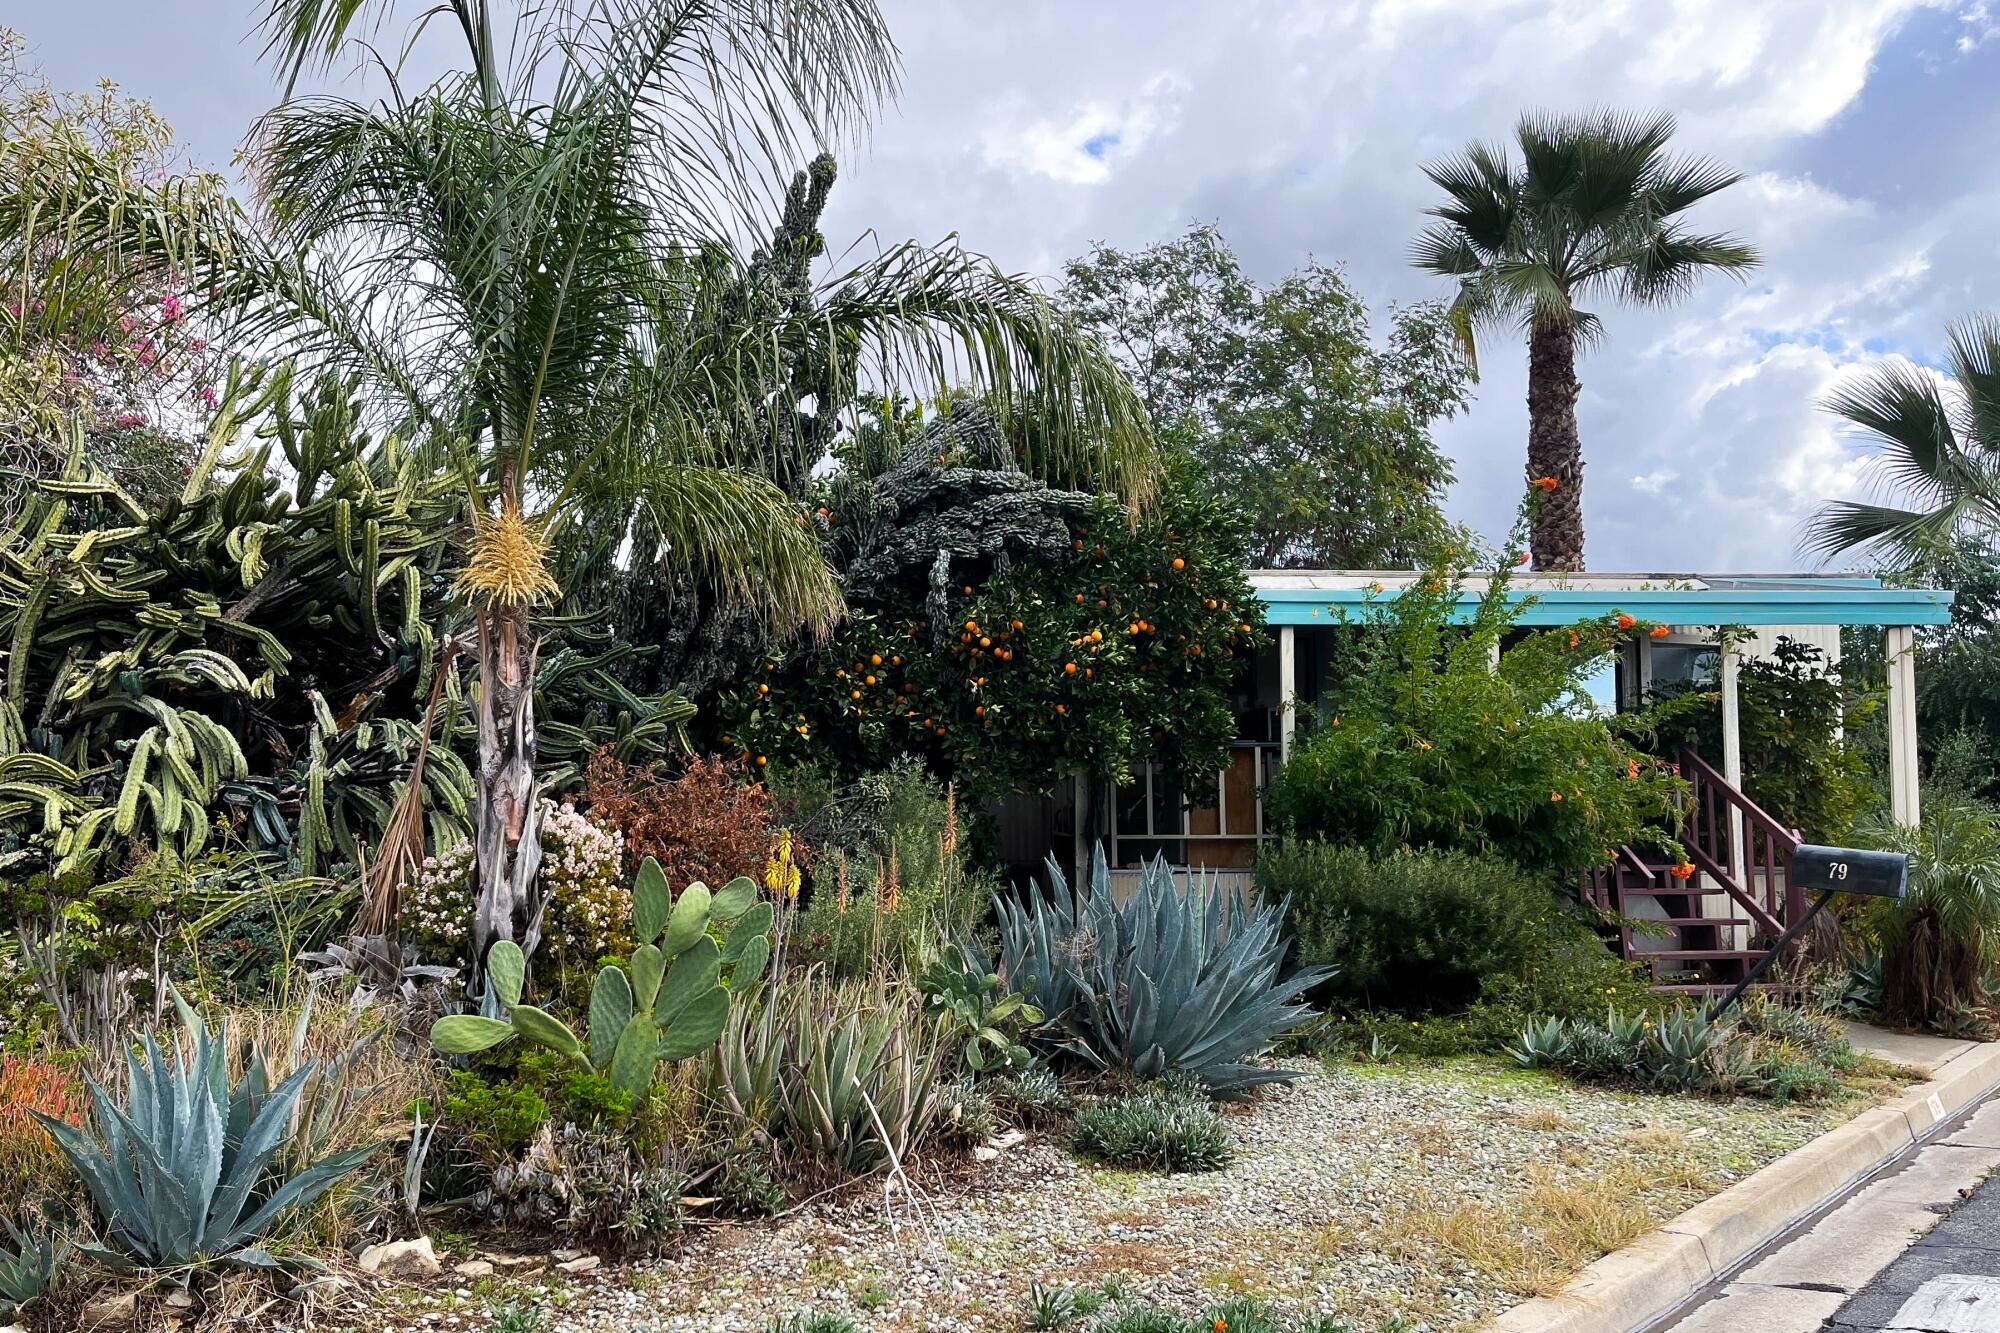 A mobile home is screened by palms and other low-water plants